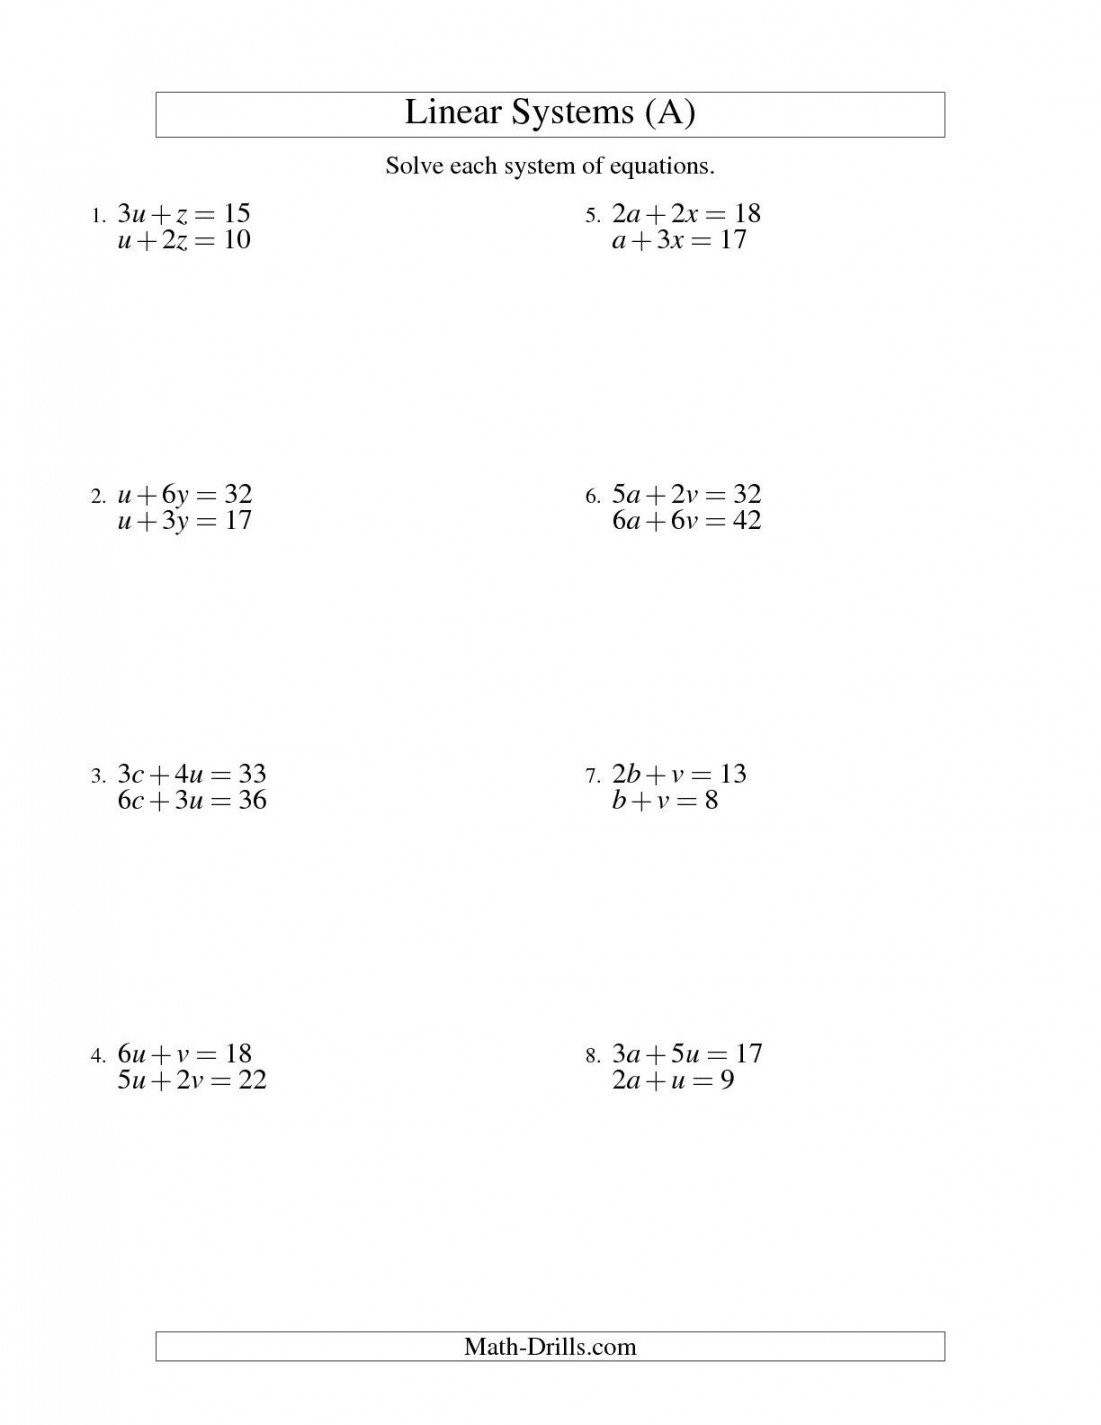 The Systems of Linear Equations -- Two Variables (A) math